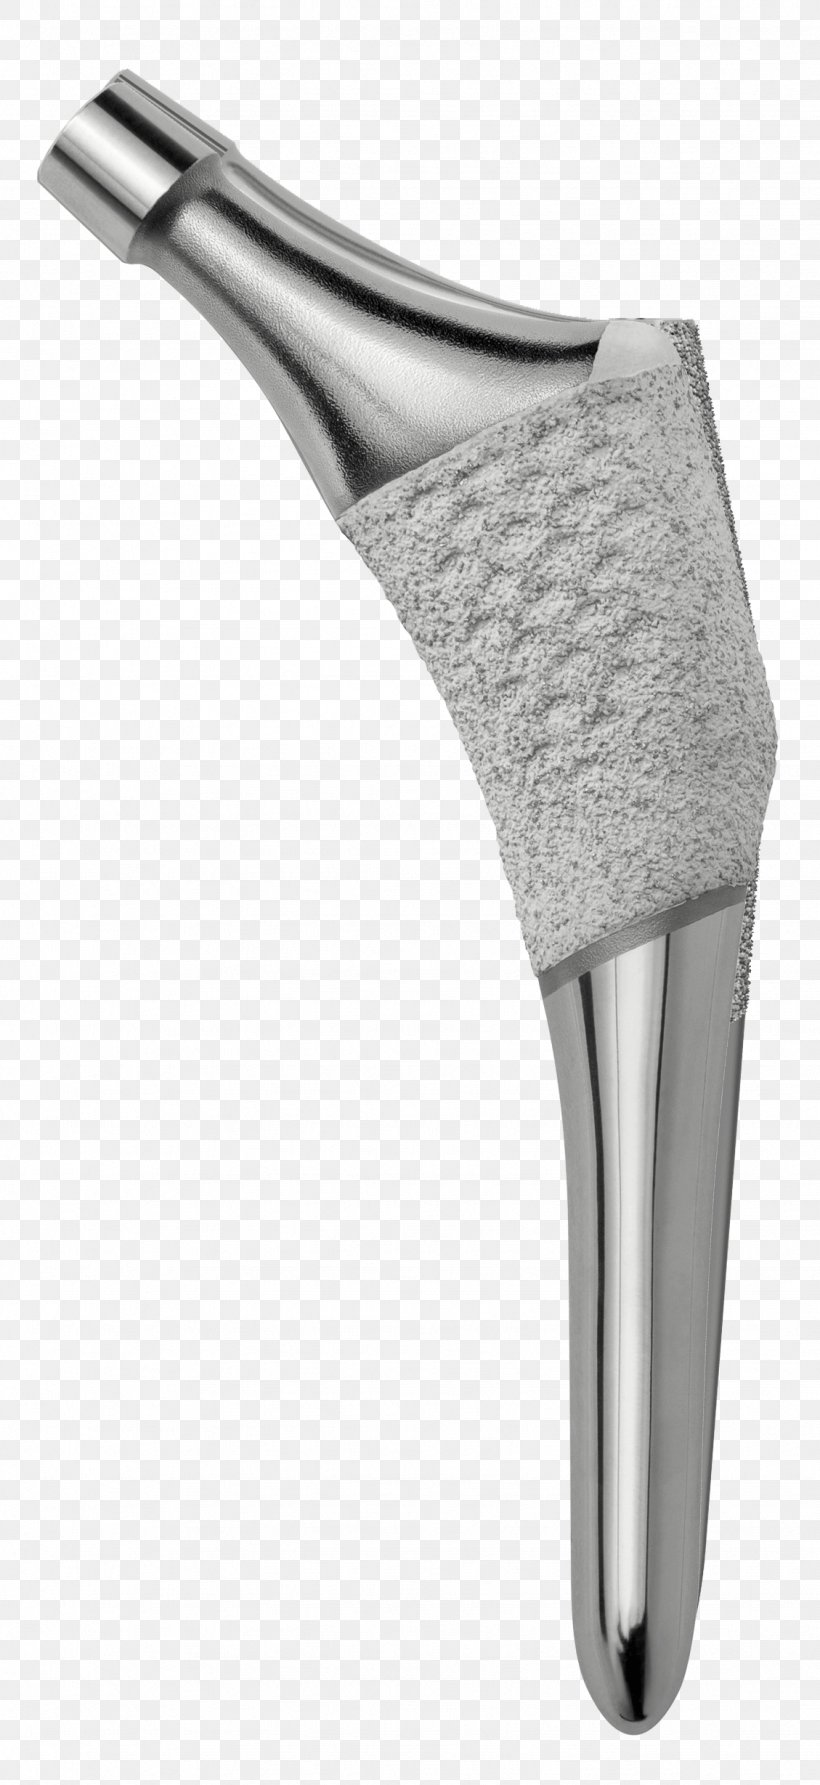 Hip Replacement Implant Femur Itsourtree.com, PNG, 1129x2458px, Hip Replacement, Brush, Femur, Hip, Implant Download Free